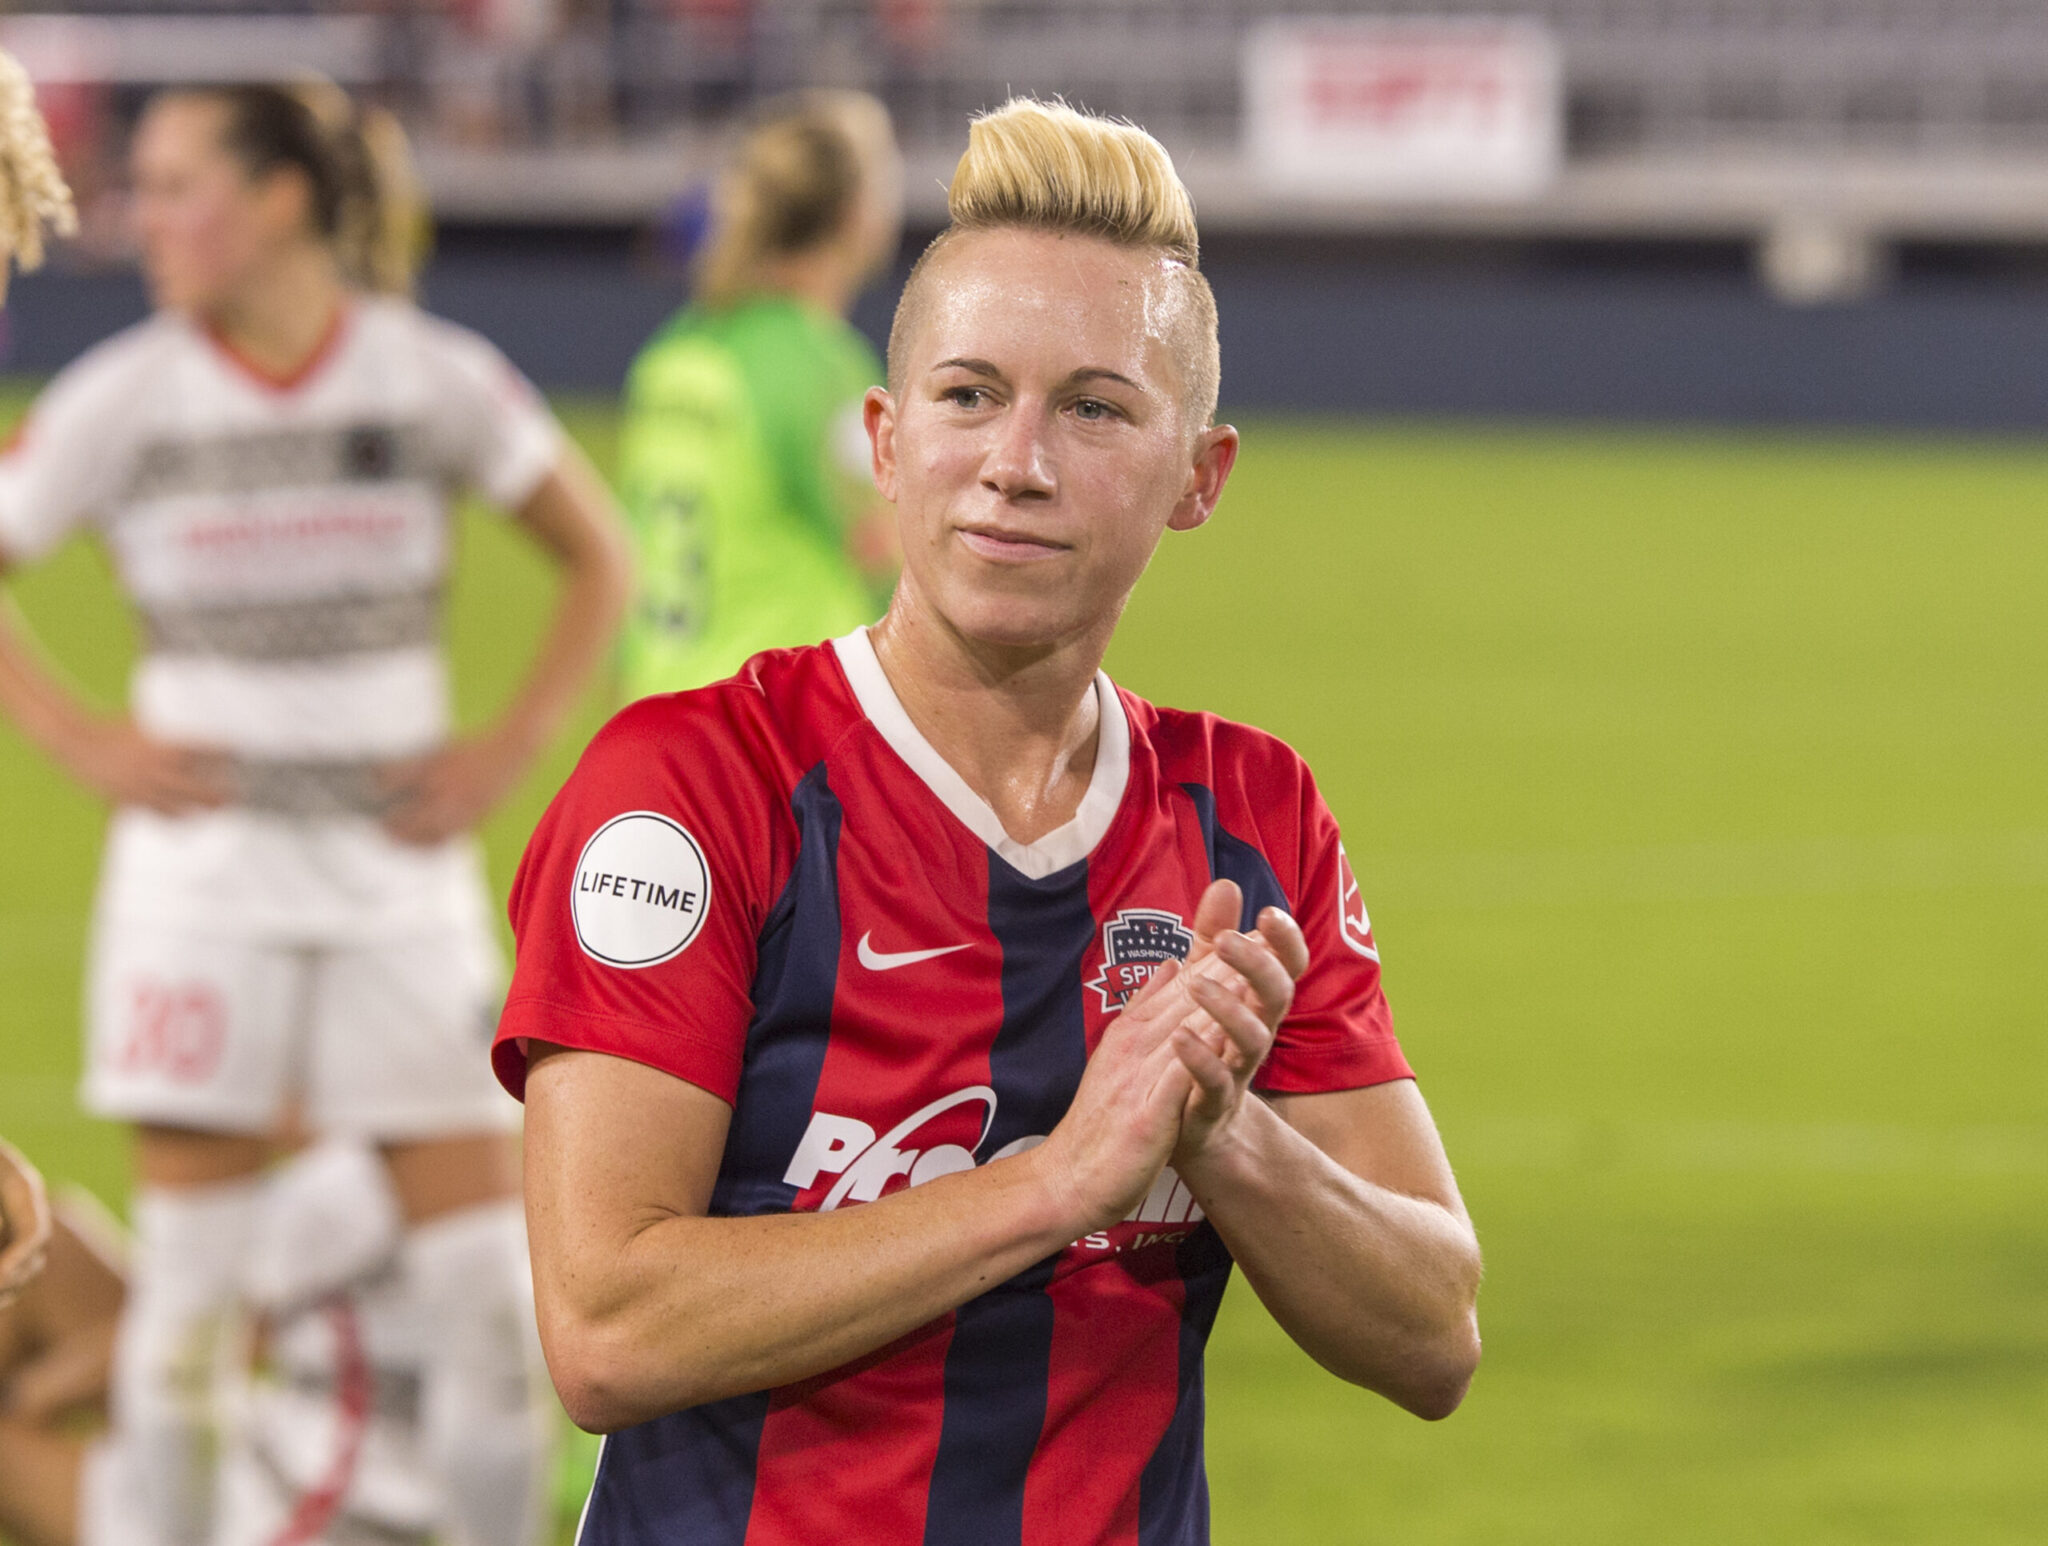 Joanna Lohman announces retirement from professional soccer Featured Image